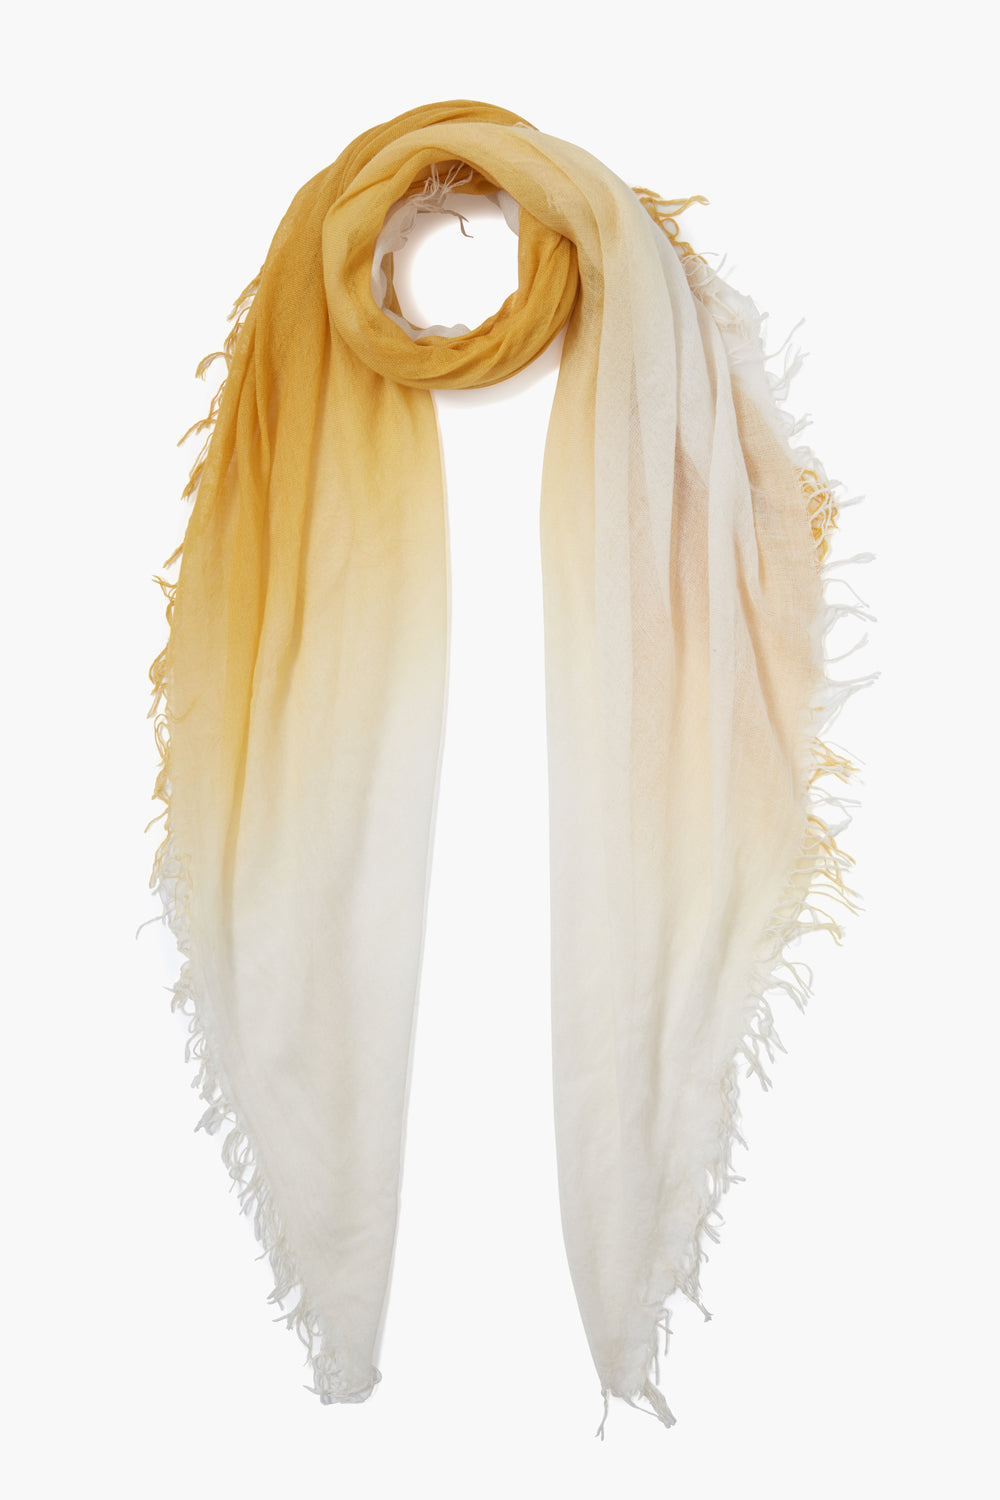 DIP DYE SCARF WITH FRINGE - HONEY - Kingfisher Road - Online Boutique